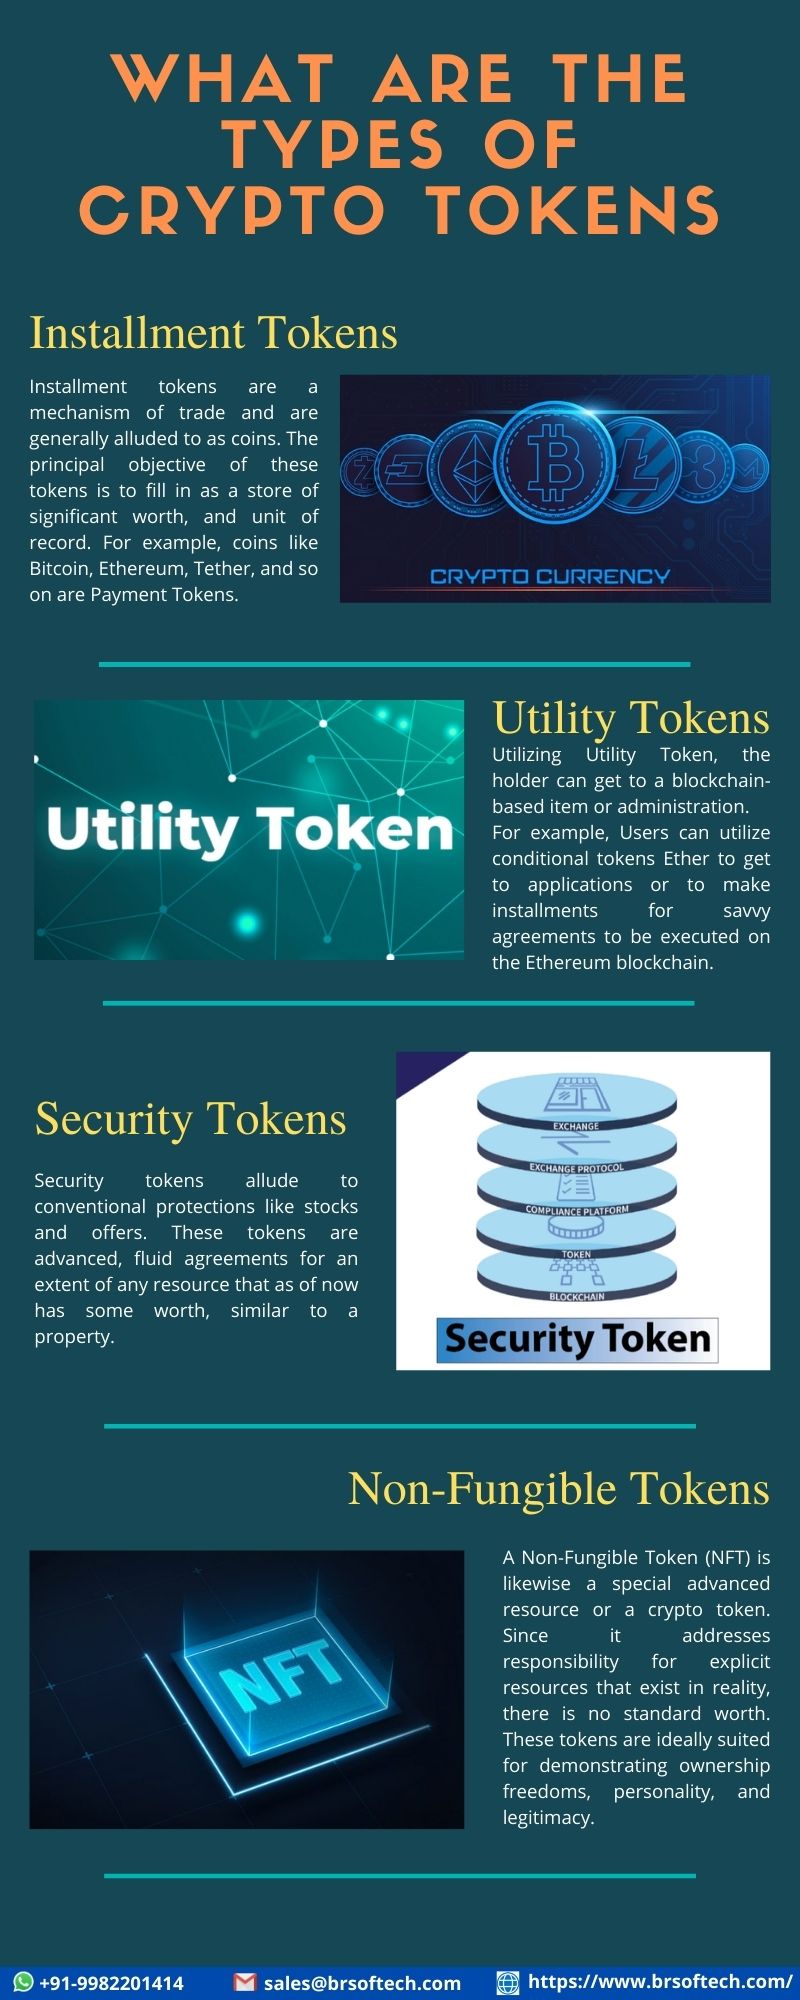 What are the Types of Crypto Tokens